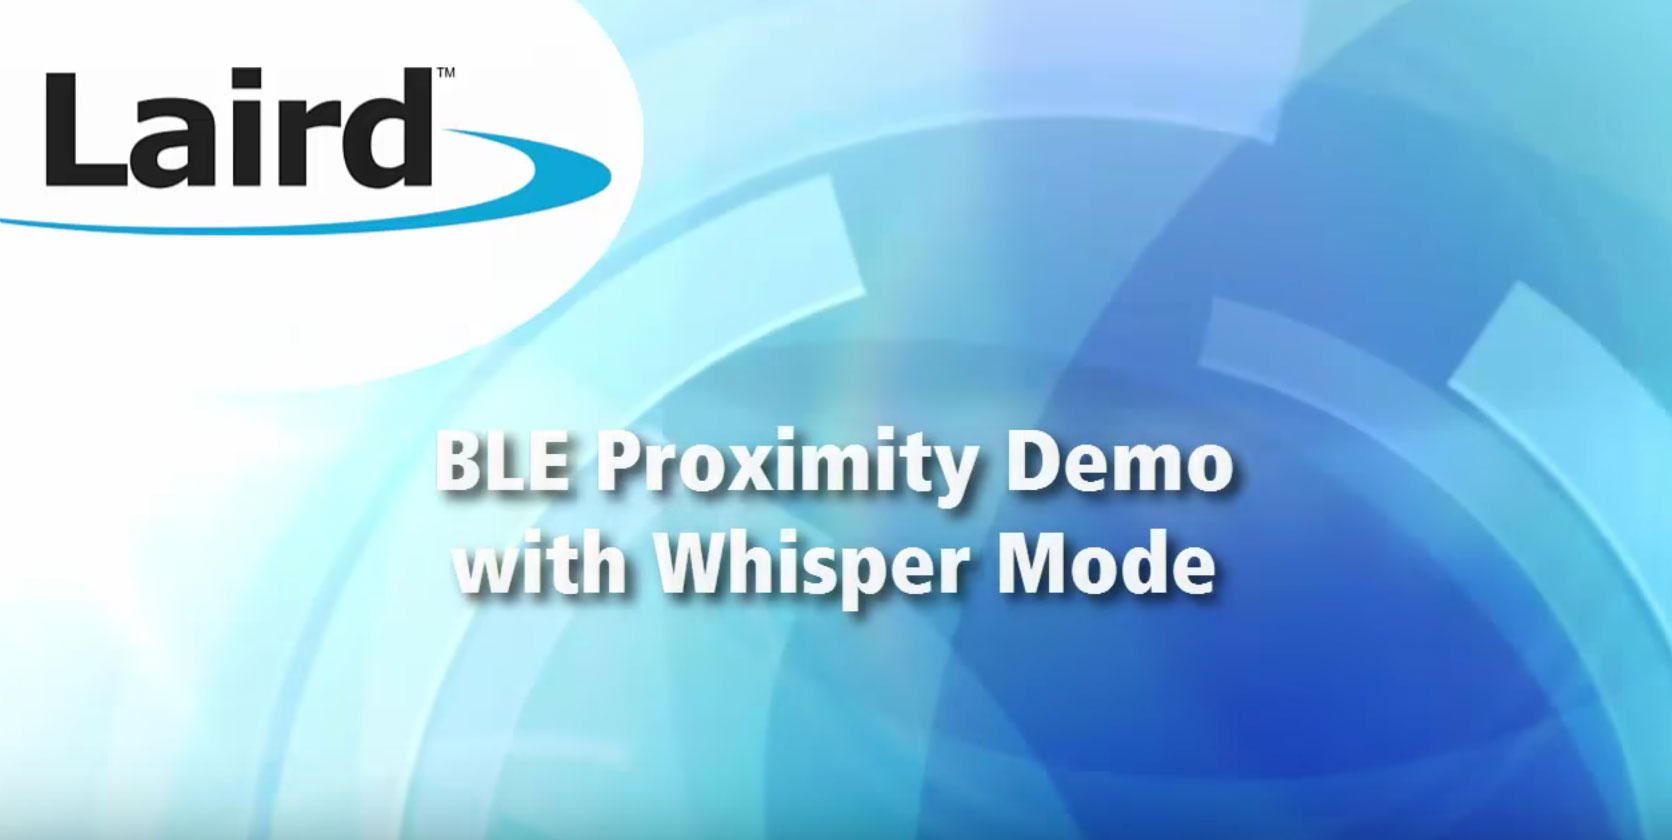 BLE Proximity Demo with Whisper Mode